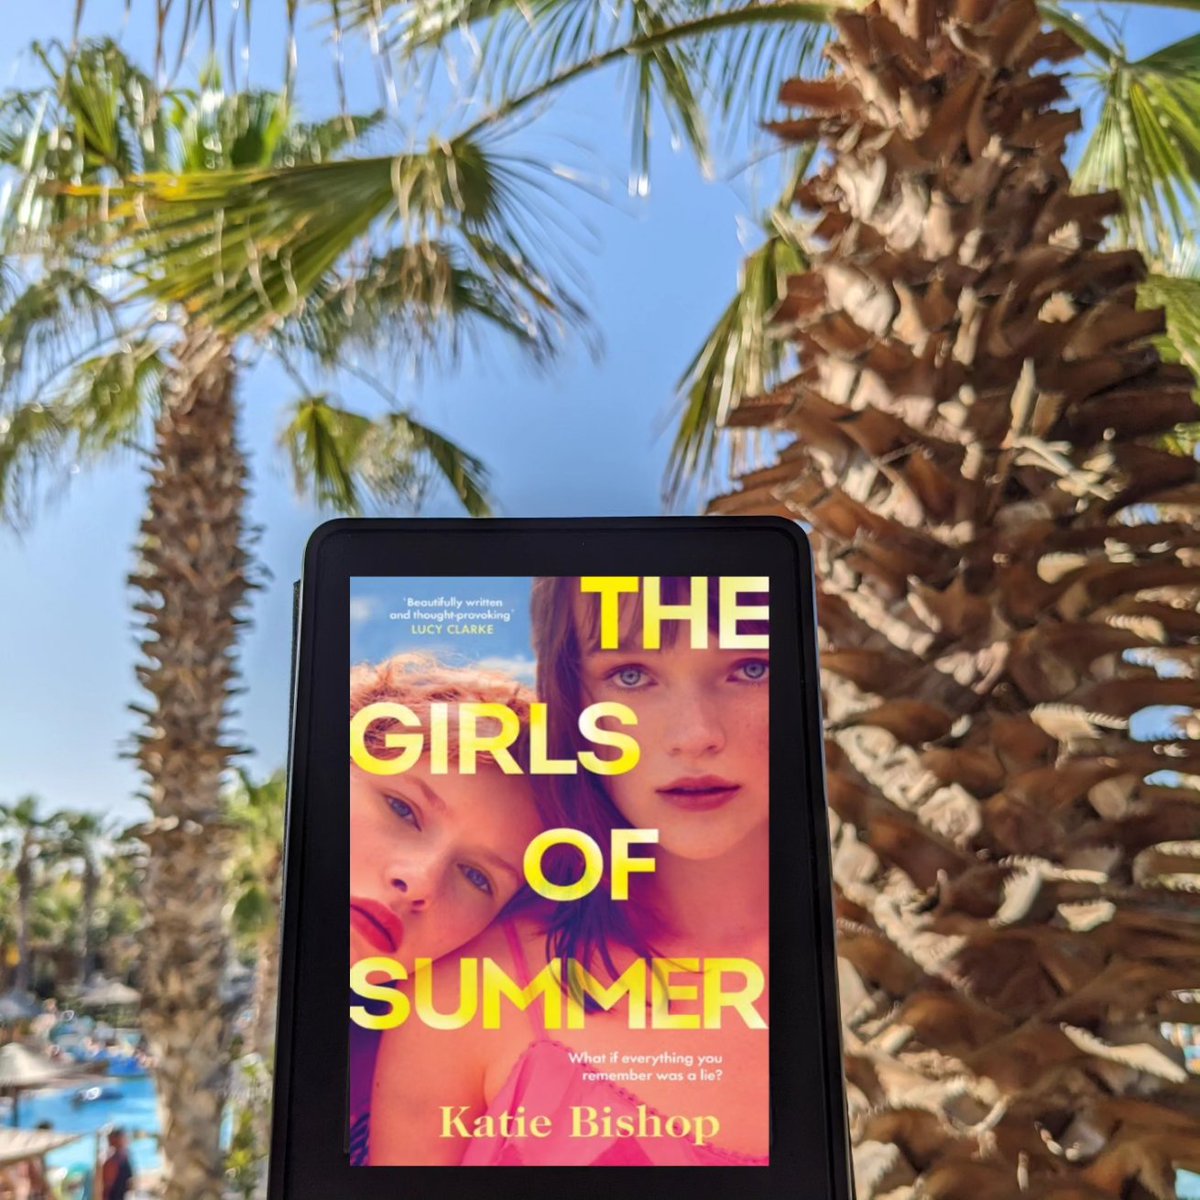 A dark and thought-provoking read

Full review The Girls of Summer @WhatKatieBWrote instagram.com/p/CuTi7evogG_/…

#bookreview #thegirlsofsummer #kindlereads #poolsidereads #netgalley #booktwt
#BookTwitter #uptoolatereading